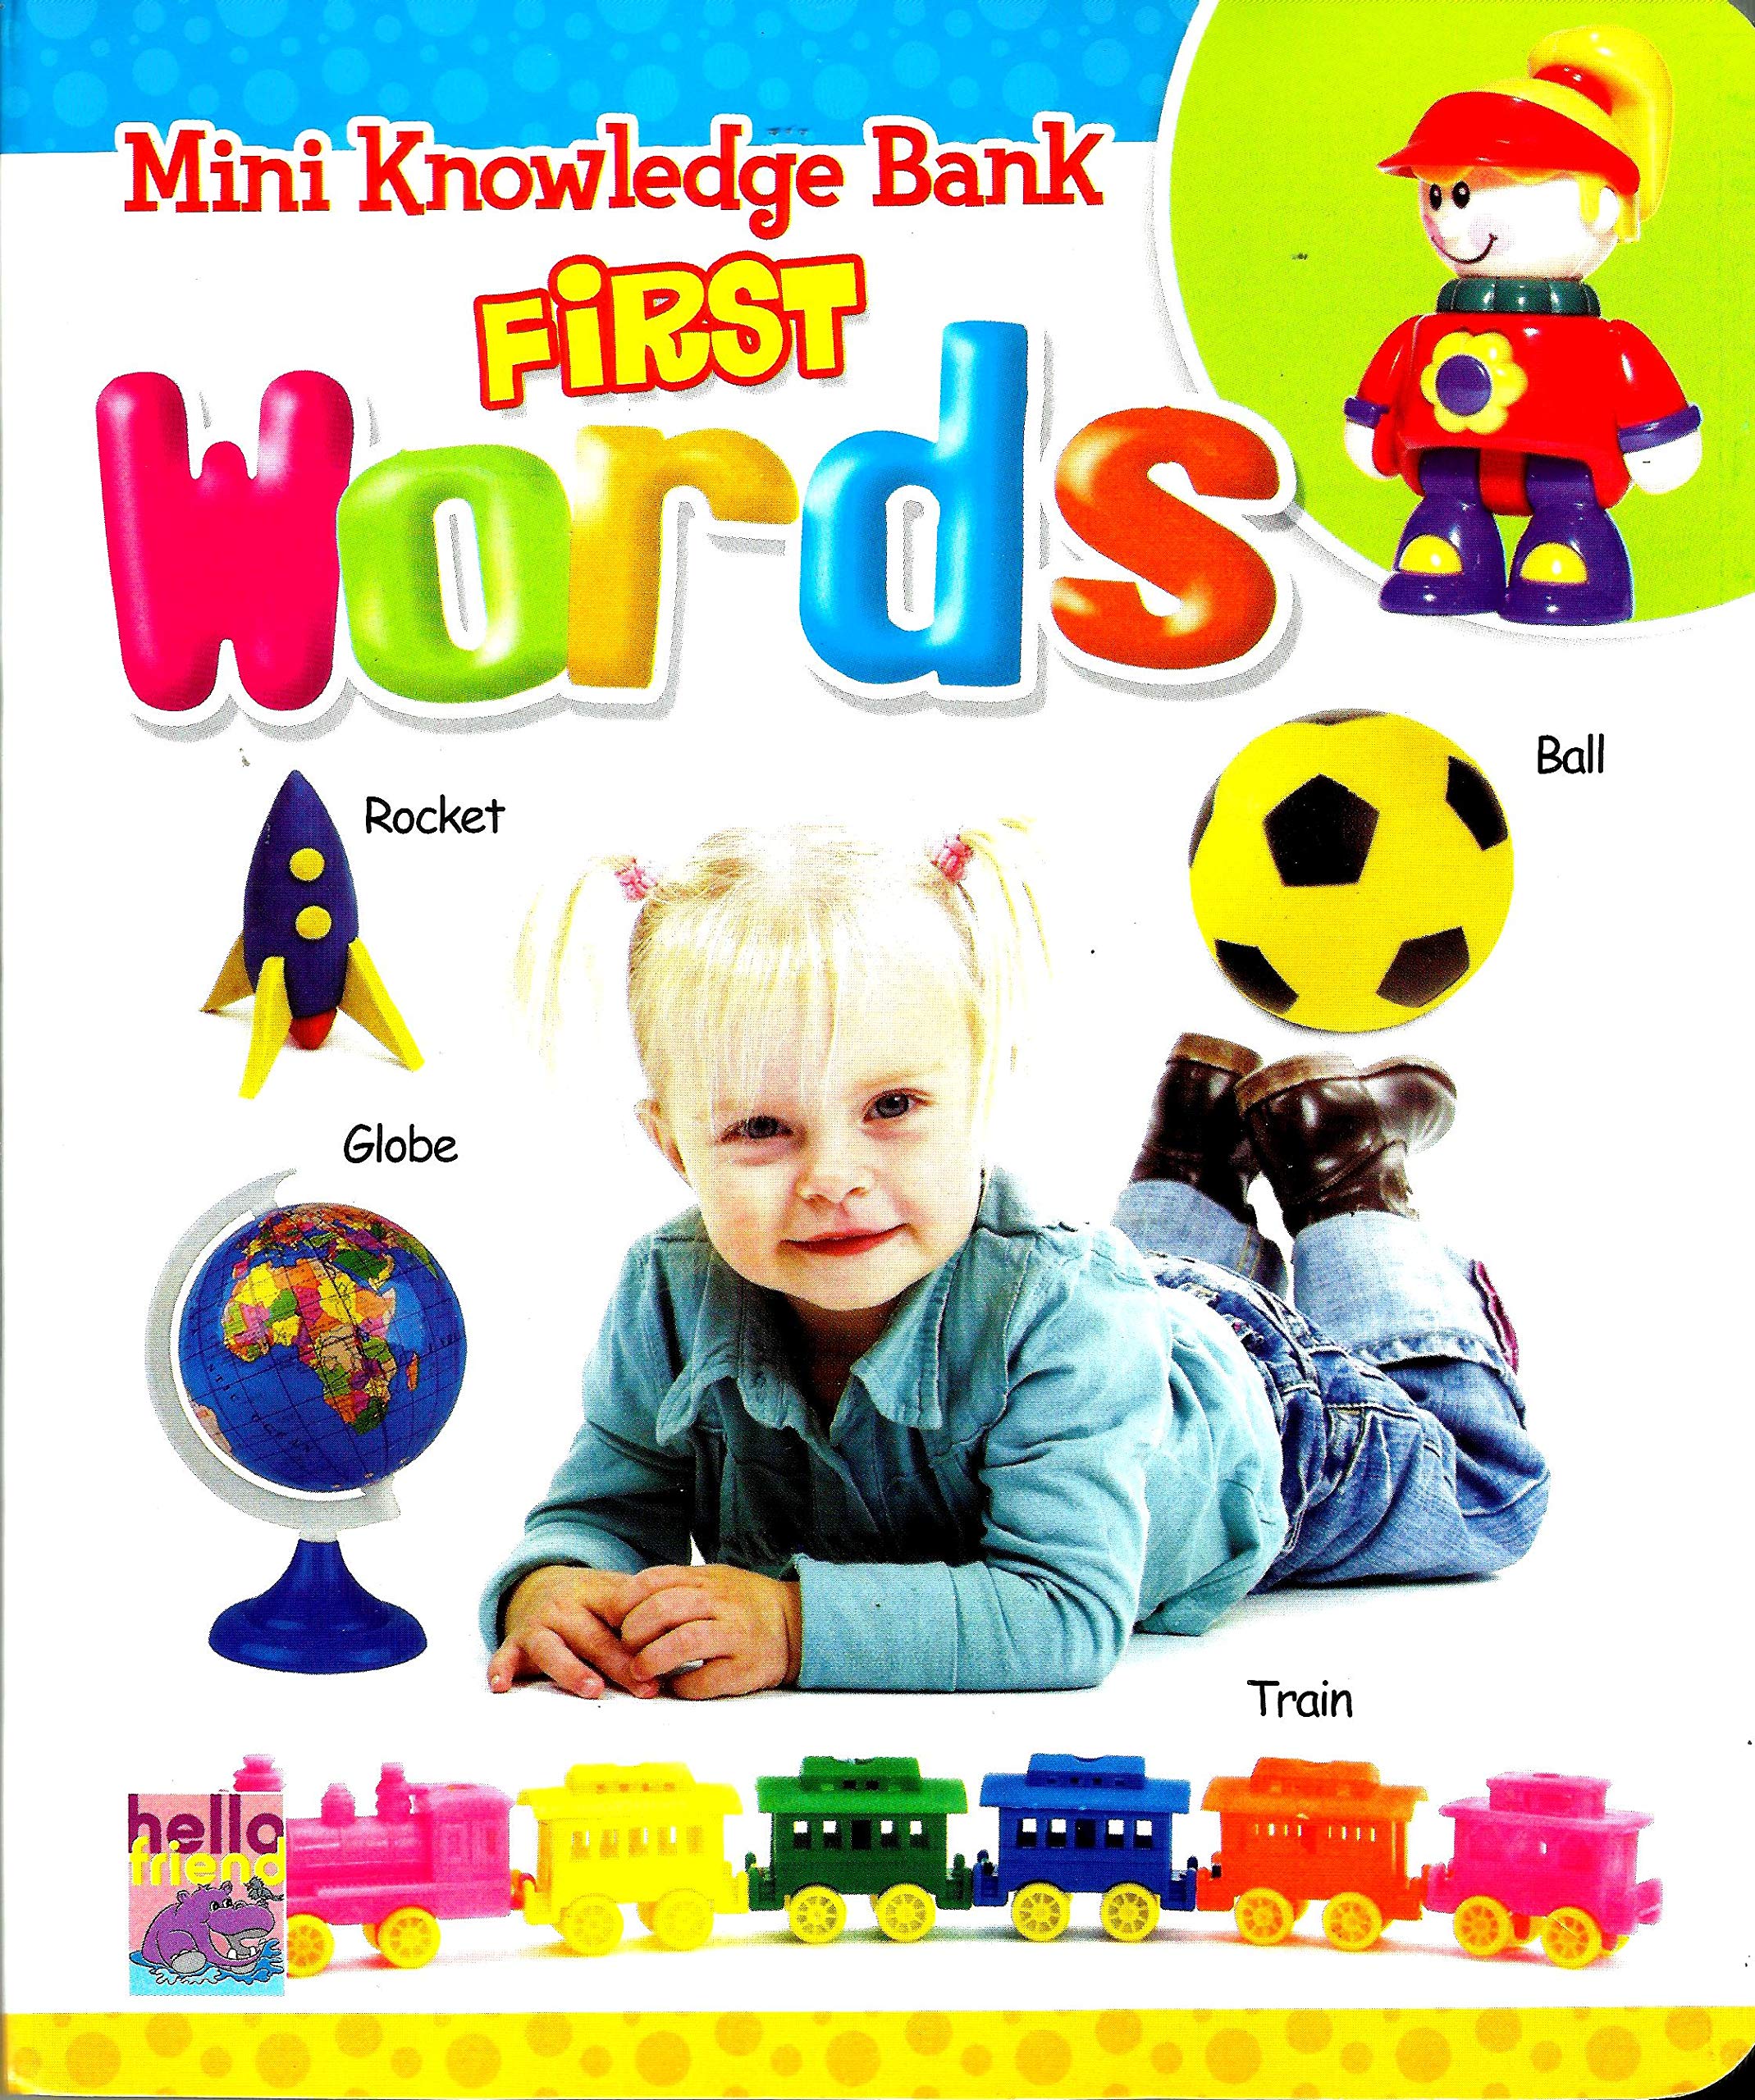 Mini Knowledge Bank First Words